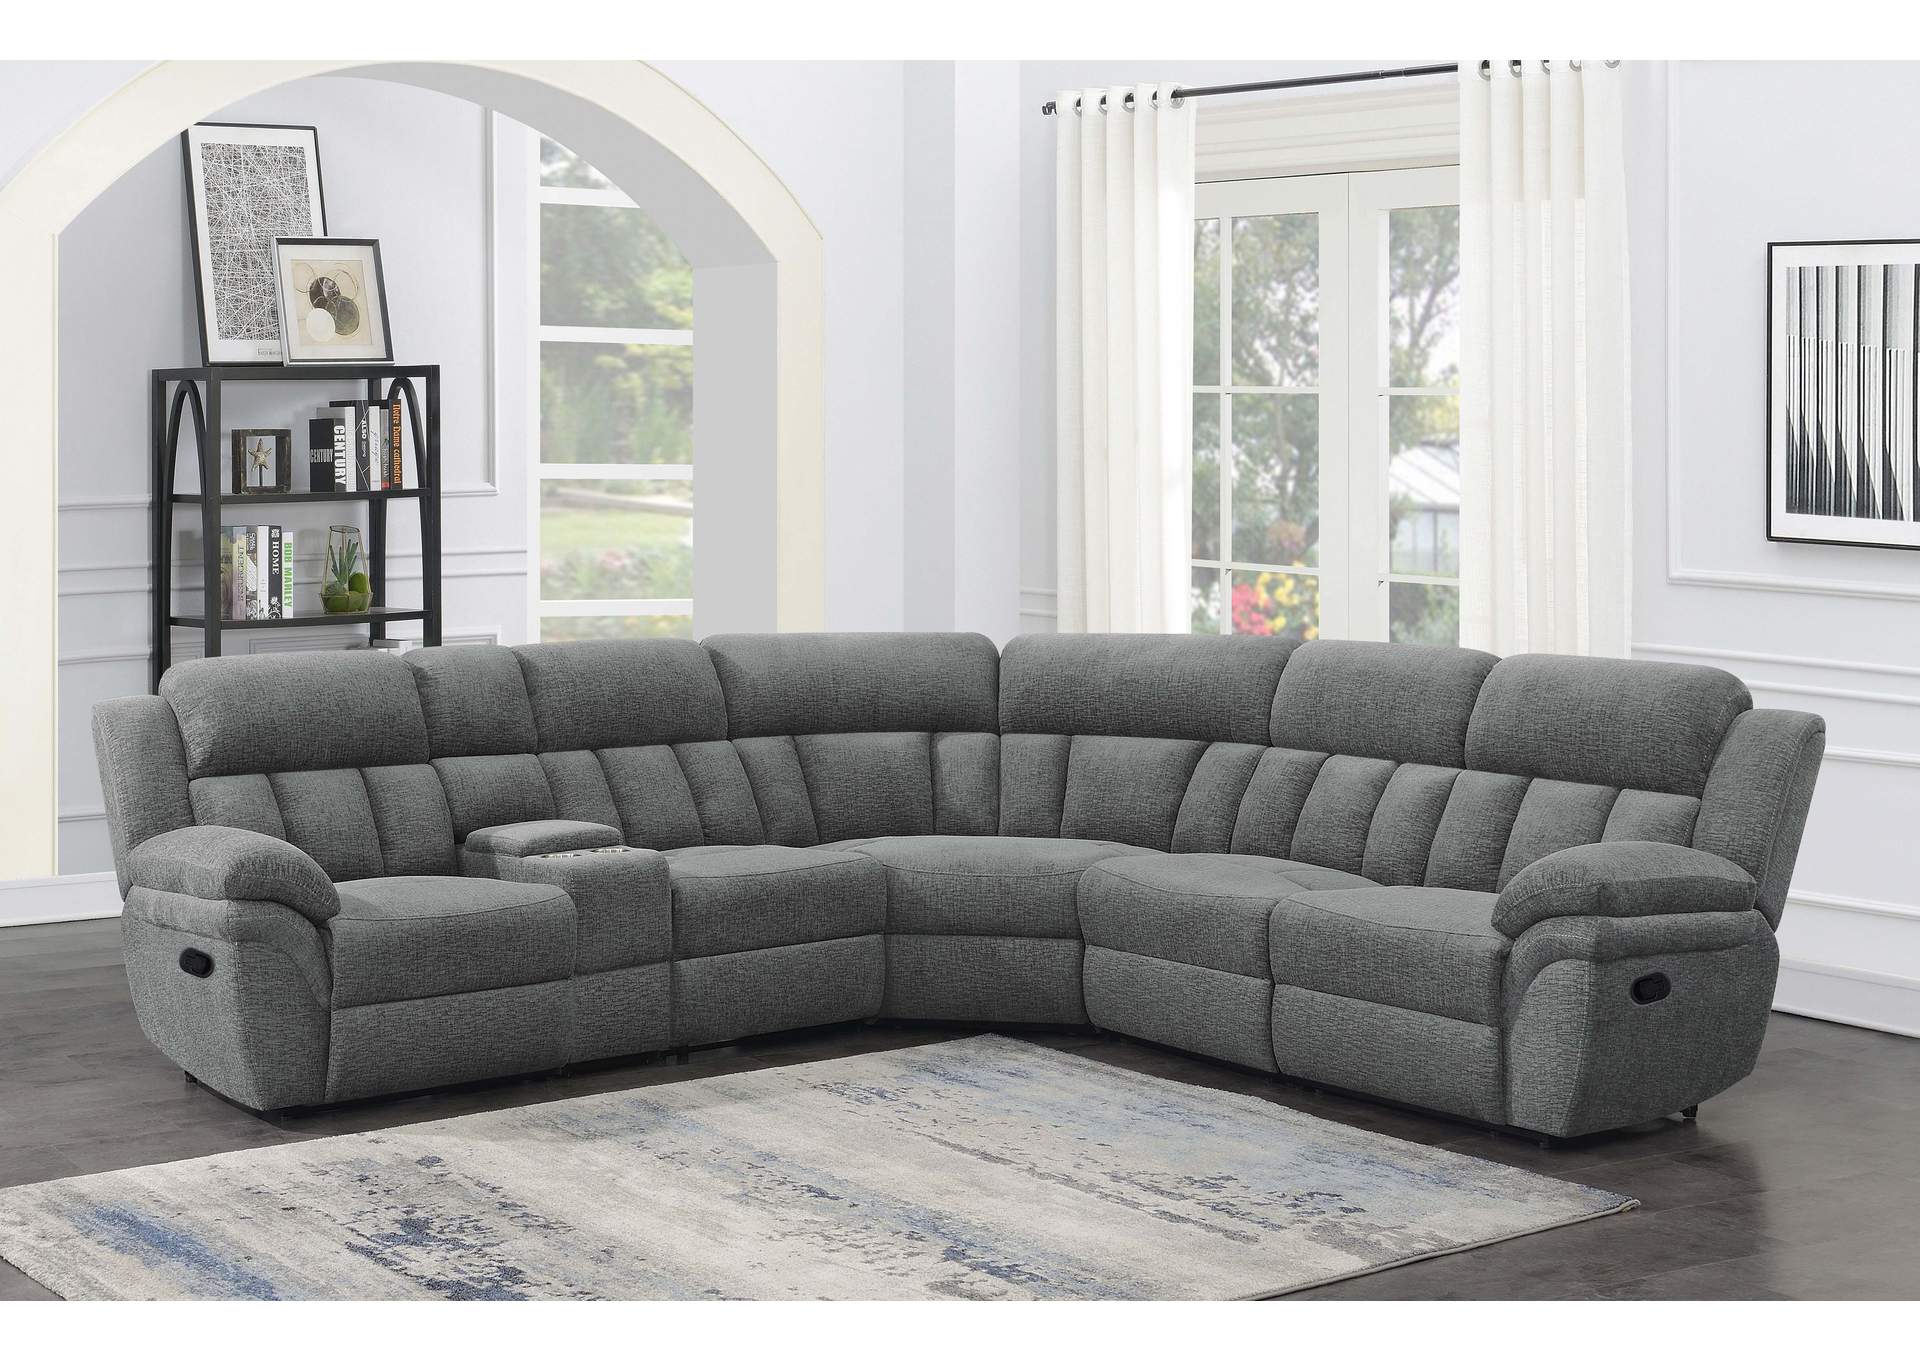 Bahrain 6-piece Upholstered Motion Sectional Charcoal,Coaster Furniture